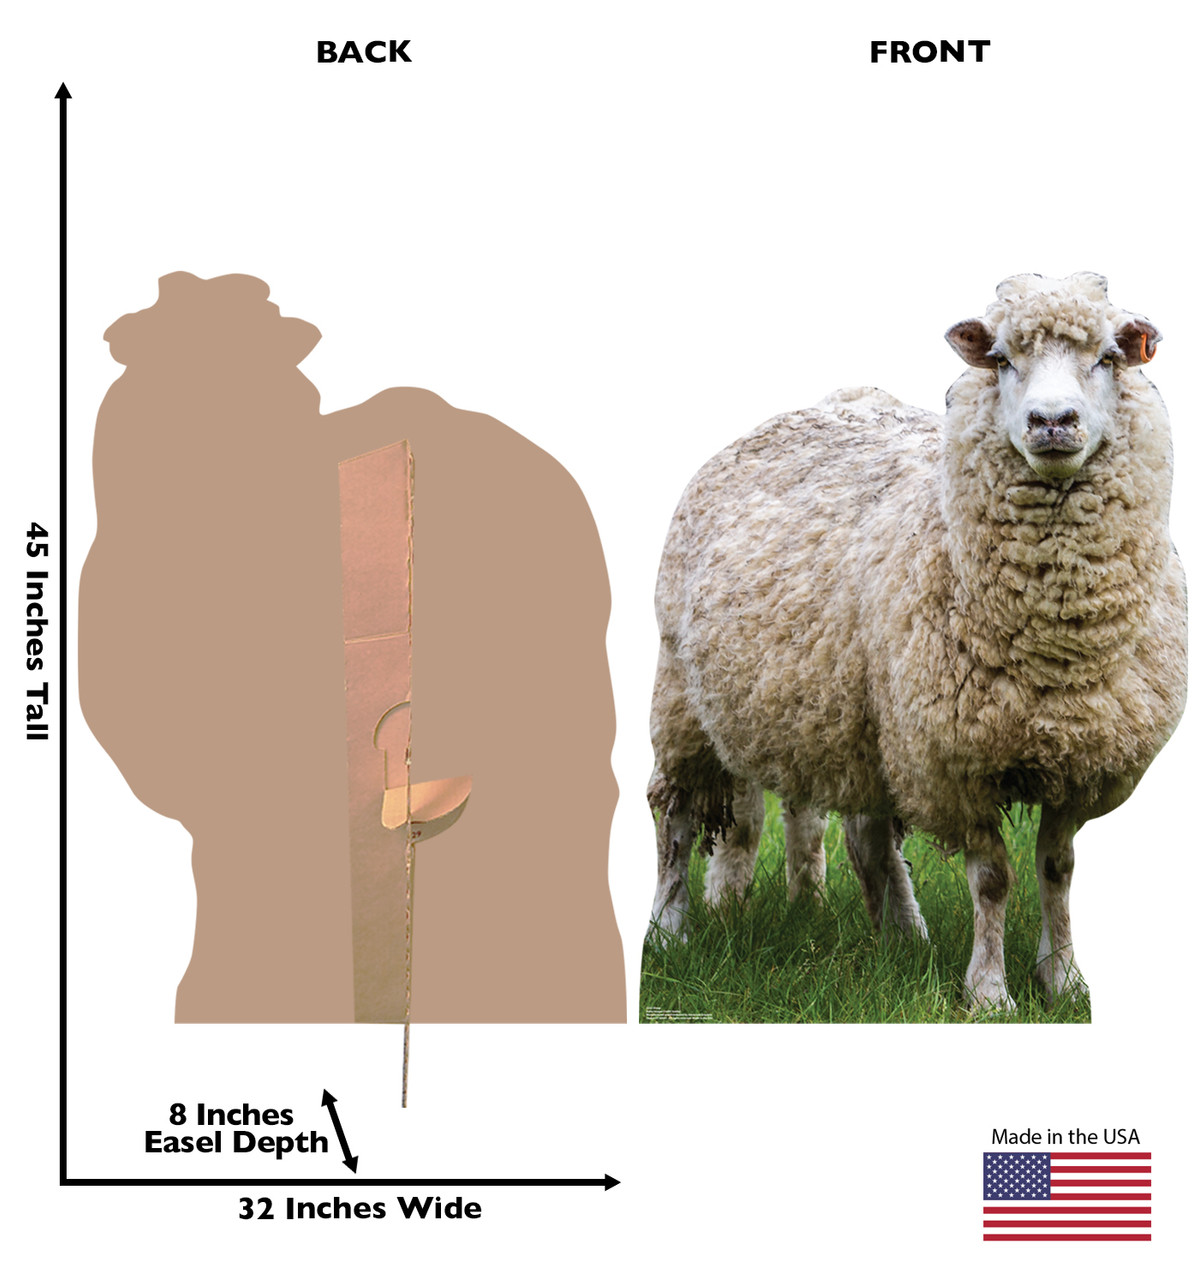 Life-size cardboard standee of a Sheep with back and front dimensions.